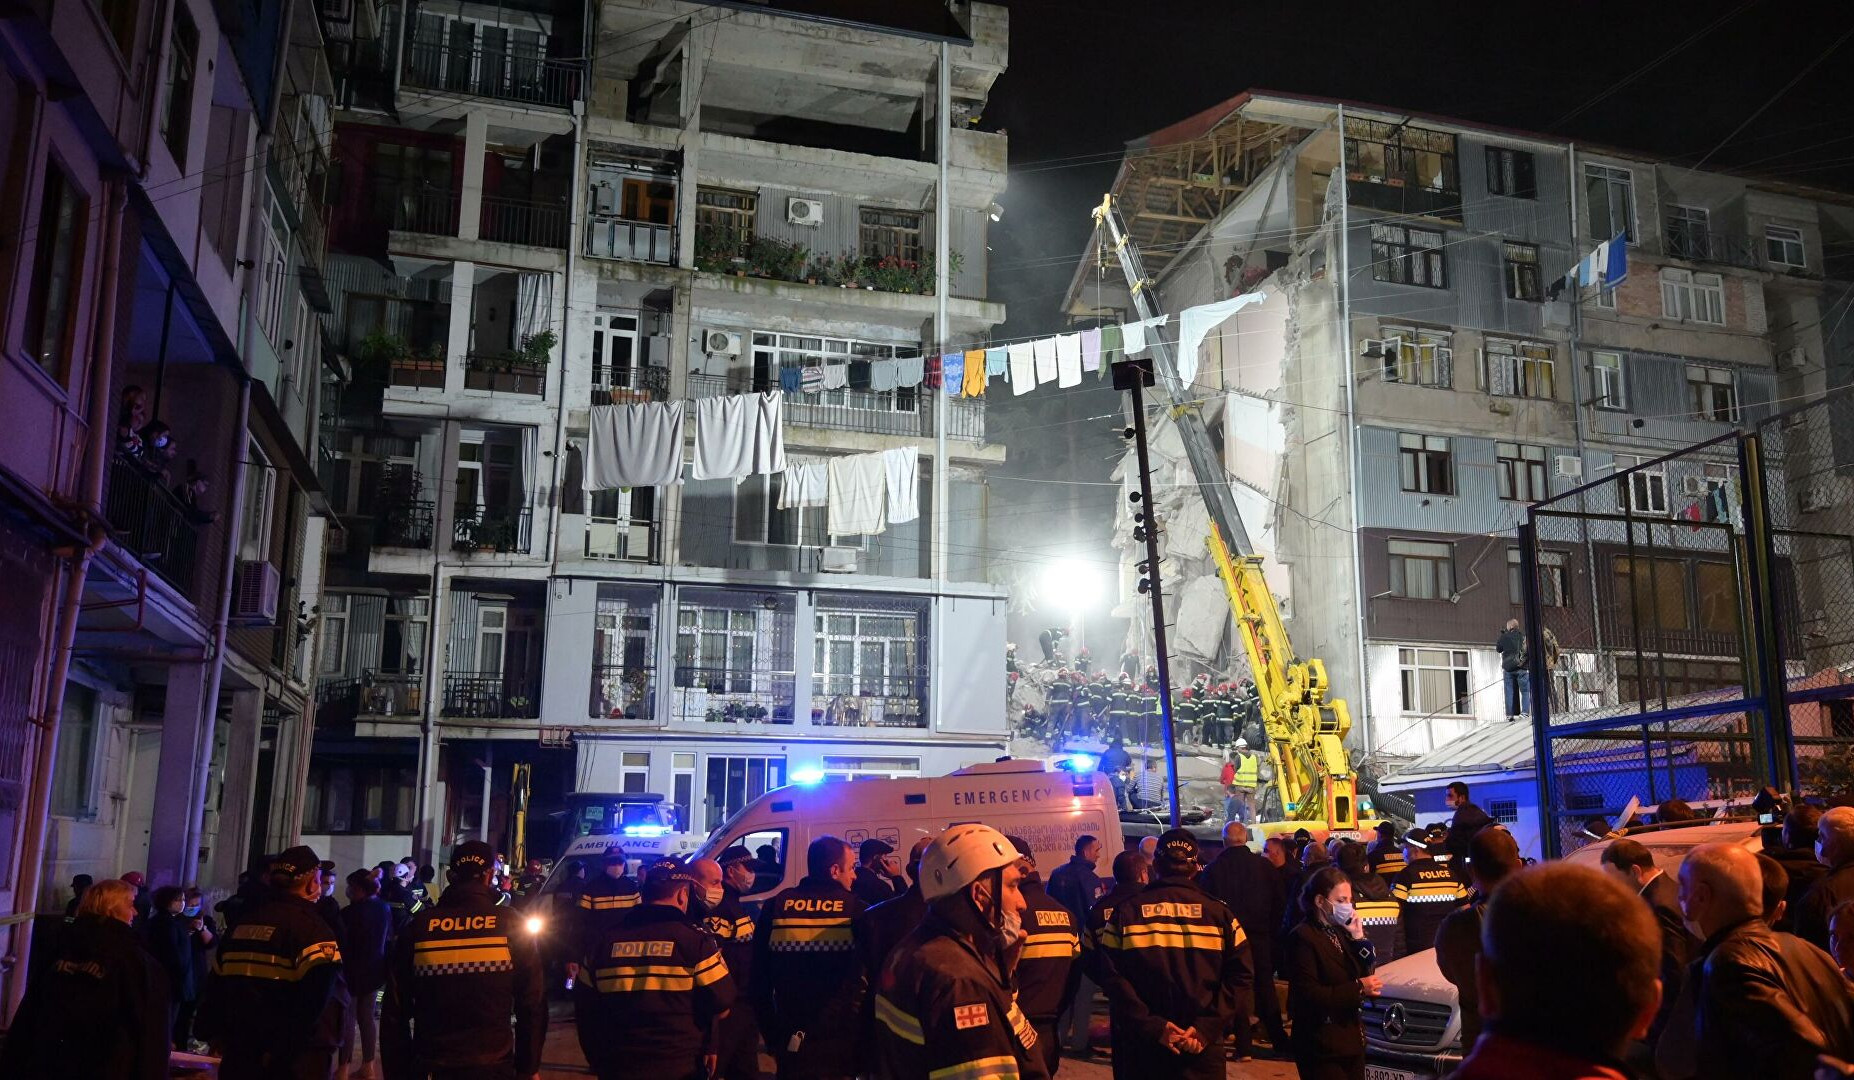 October 11 declared day of mourning for victims in Batumi building collapse